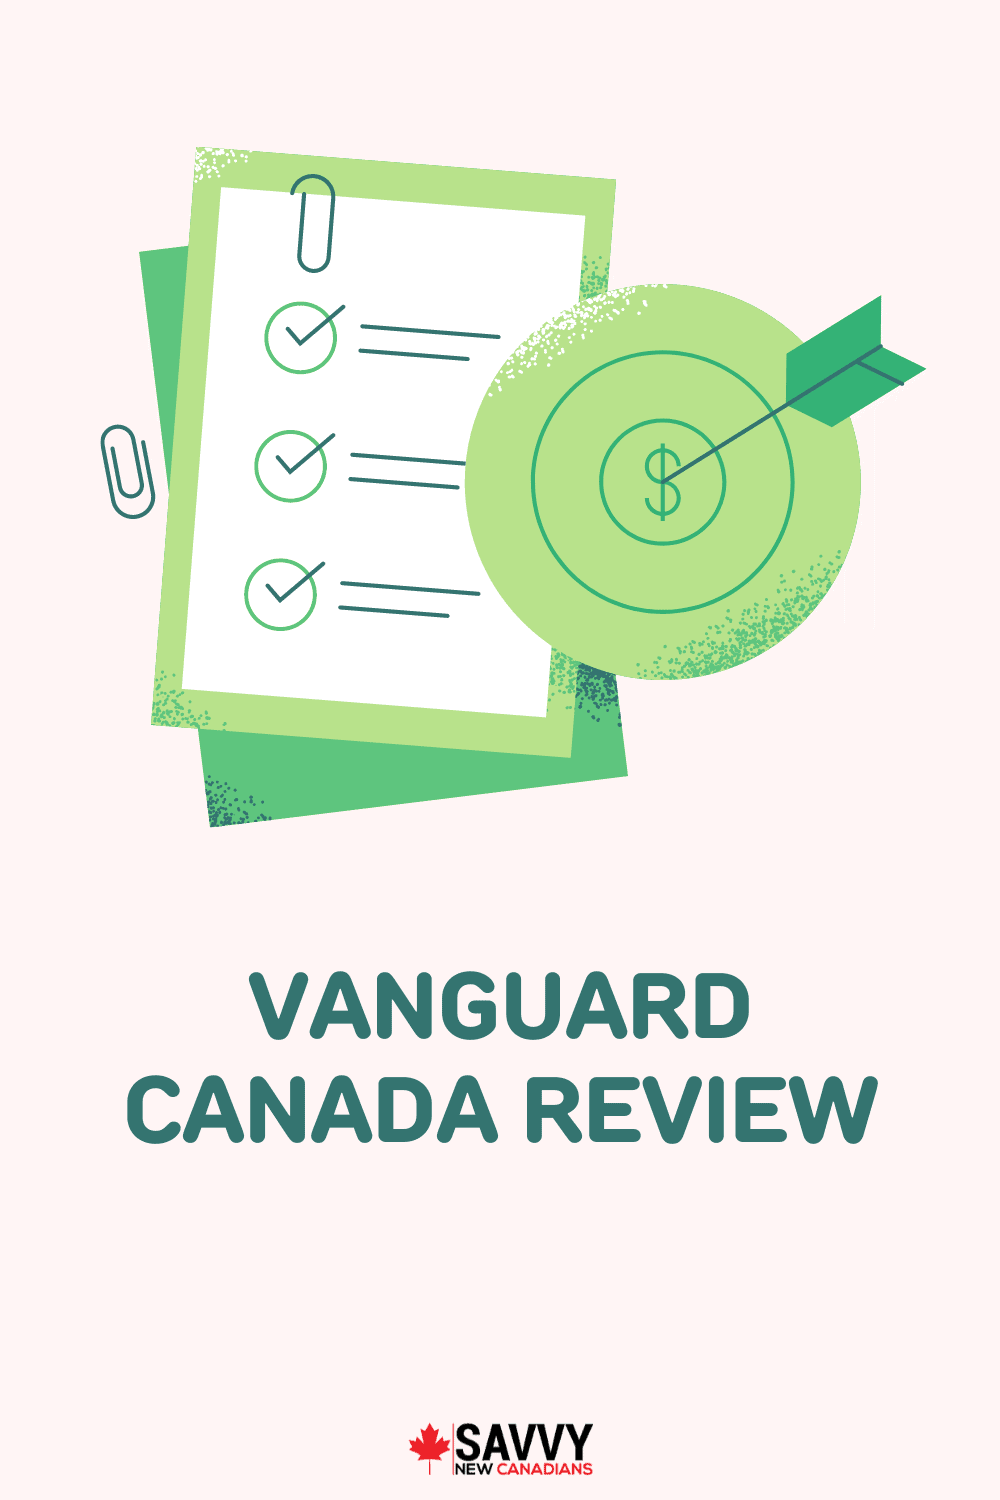 Vanguard Canada Review 2022: ETF List, Pros, Cons, Fees, and More